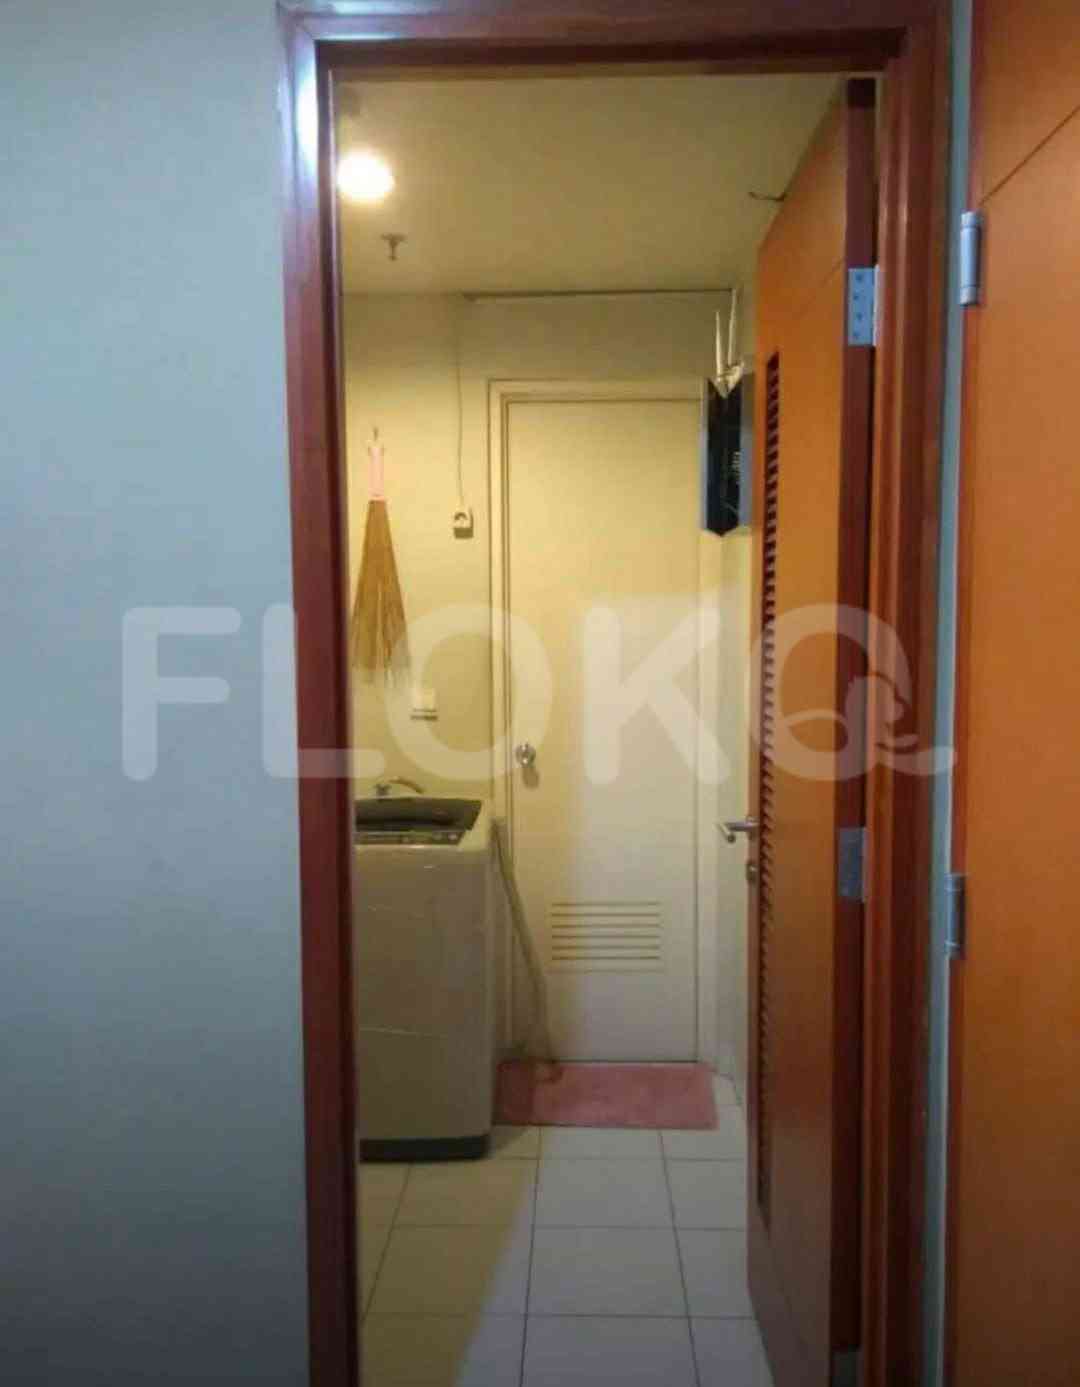 2 Bedroom on nullth Floor for Rent in Kuningan Place Apartment - fku453 3